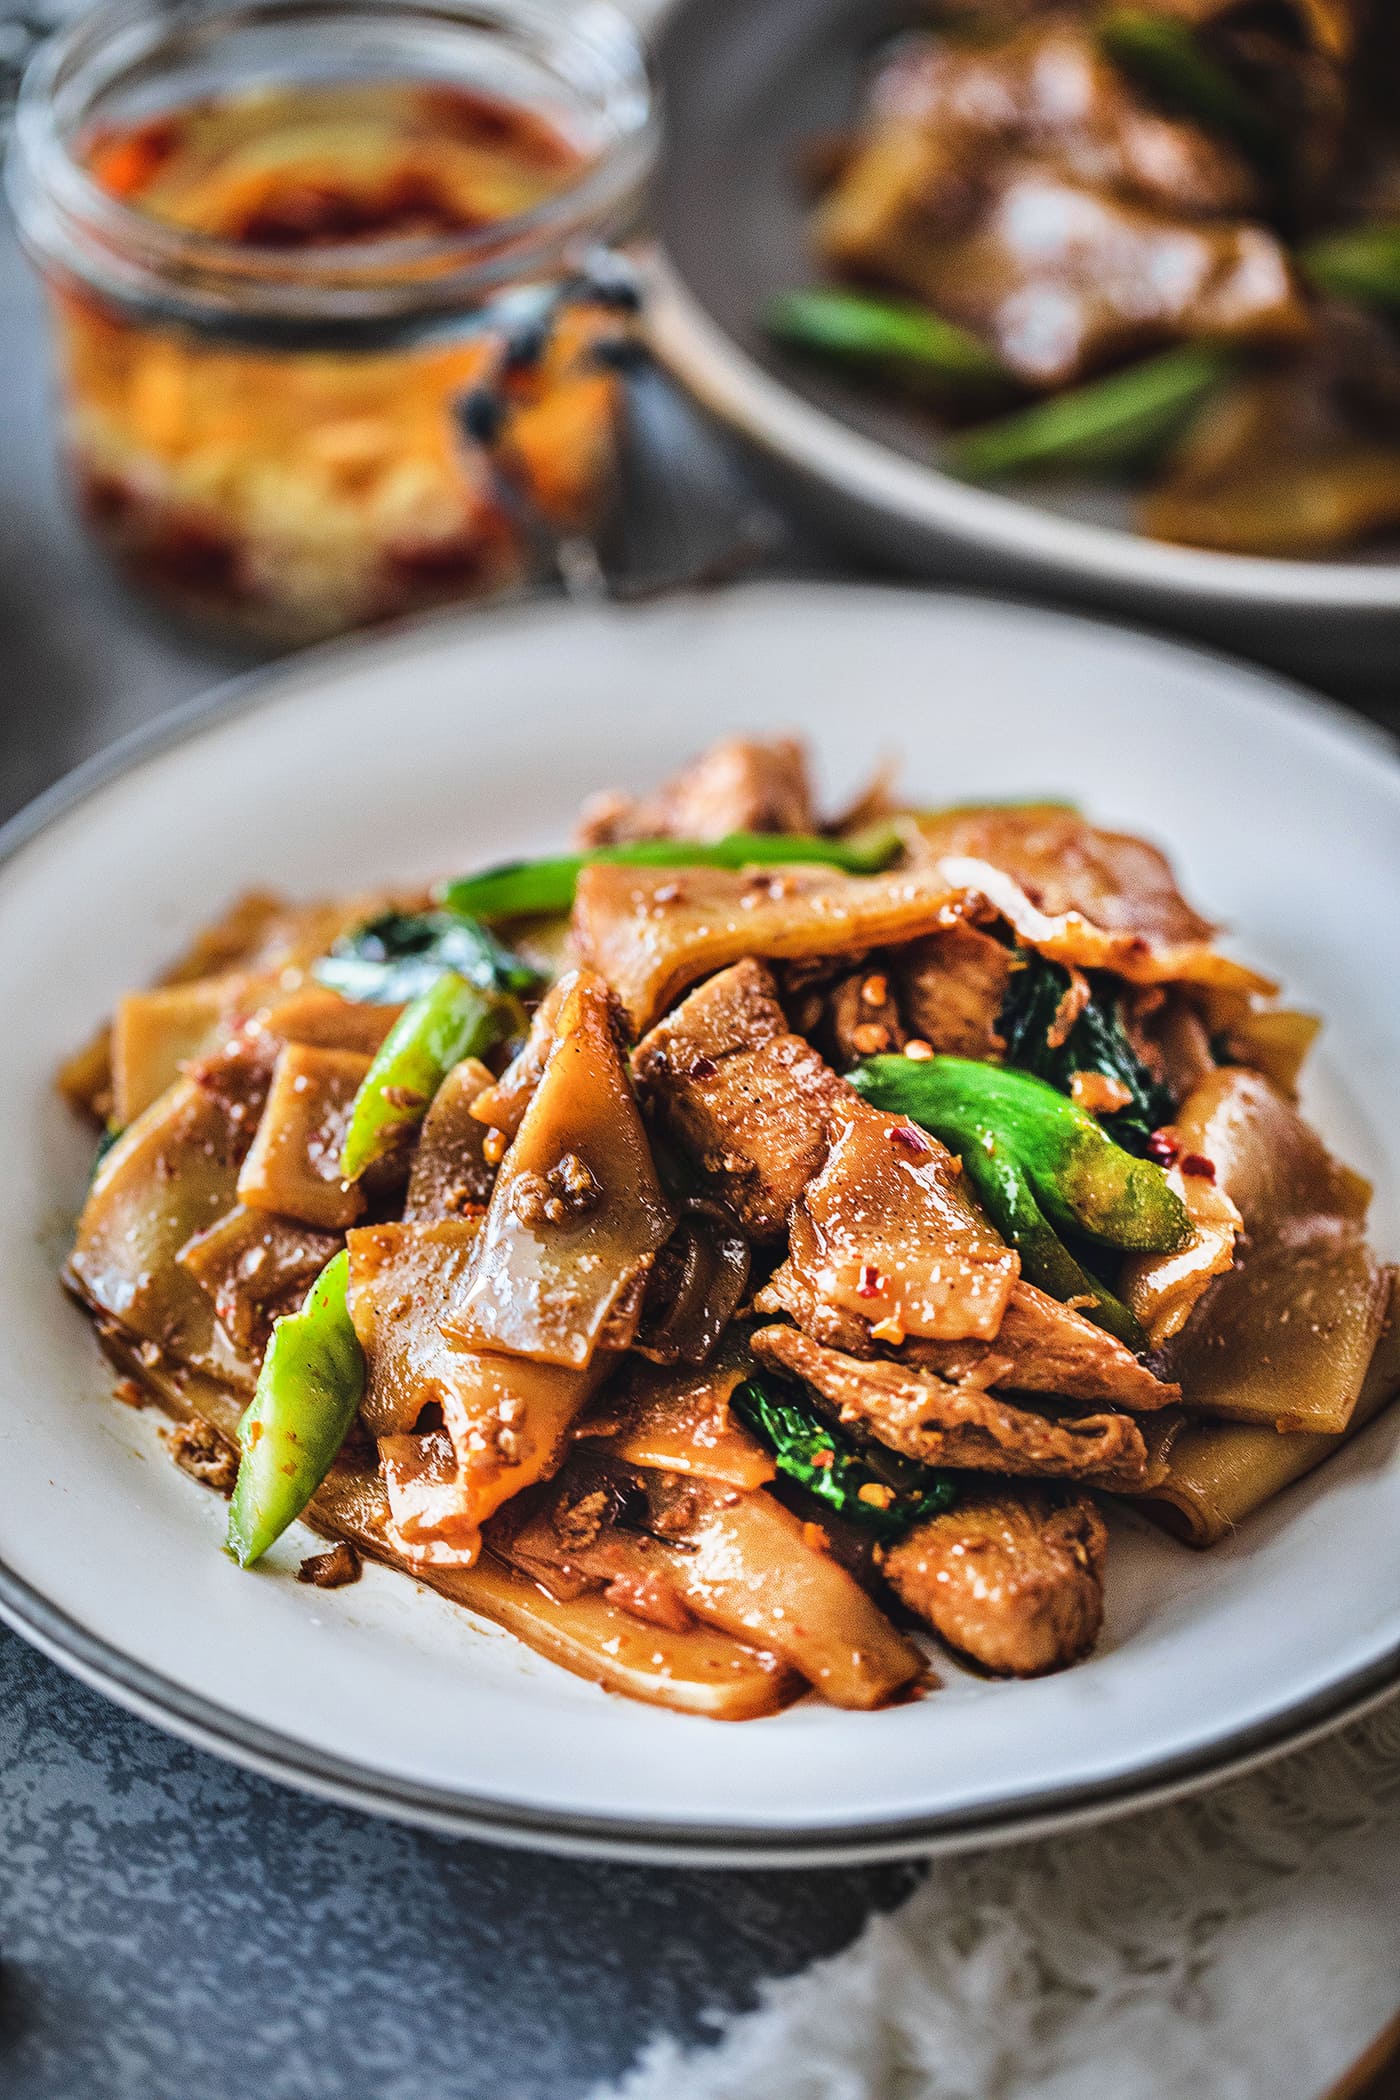 Pad See Ew is one of the most delicious Thai stir fry dishes! It uses wide rice noodles, garlic, eggs, sauces, and Chinese broccoli. This popular street food has a silky and savory flavor from the use of Thai sauces, making this Pad See Ew recipe delightfully memorable. #padseeew #thaifood #padseeewrecipe #senyai 